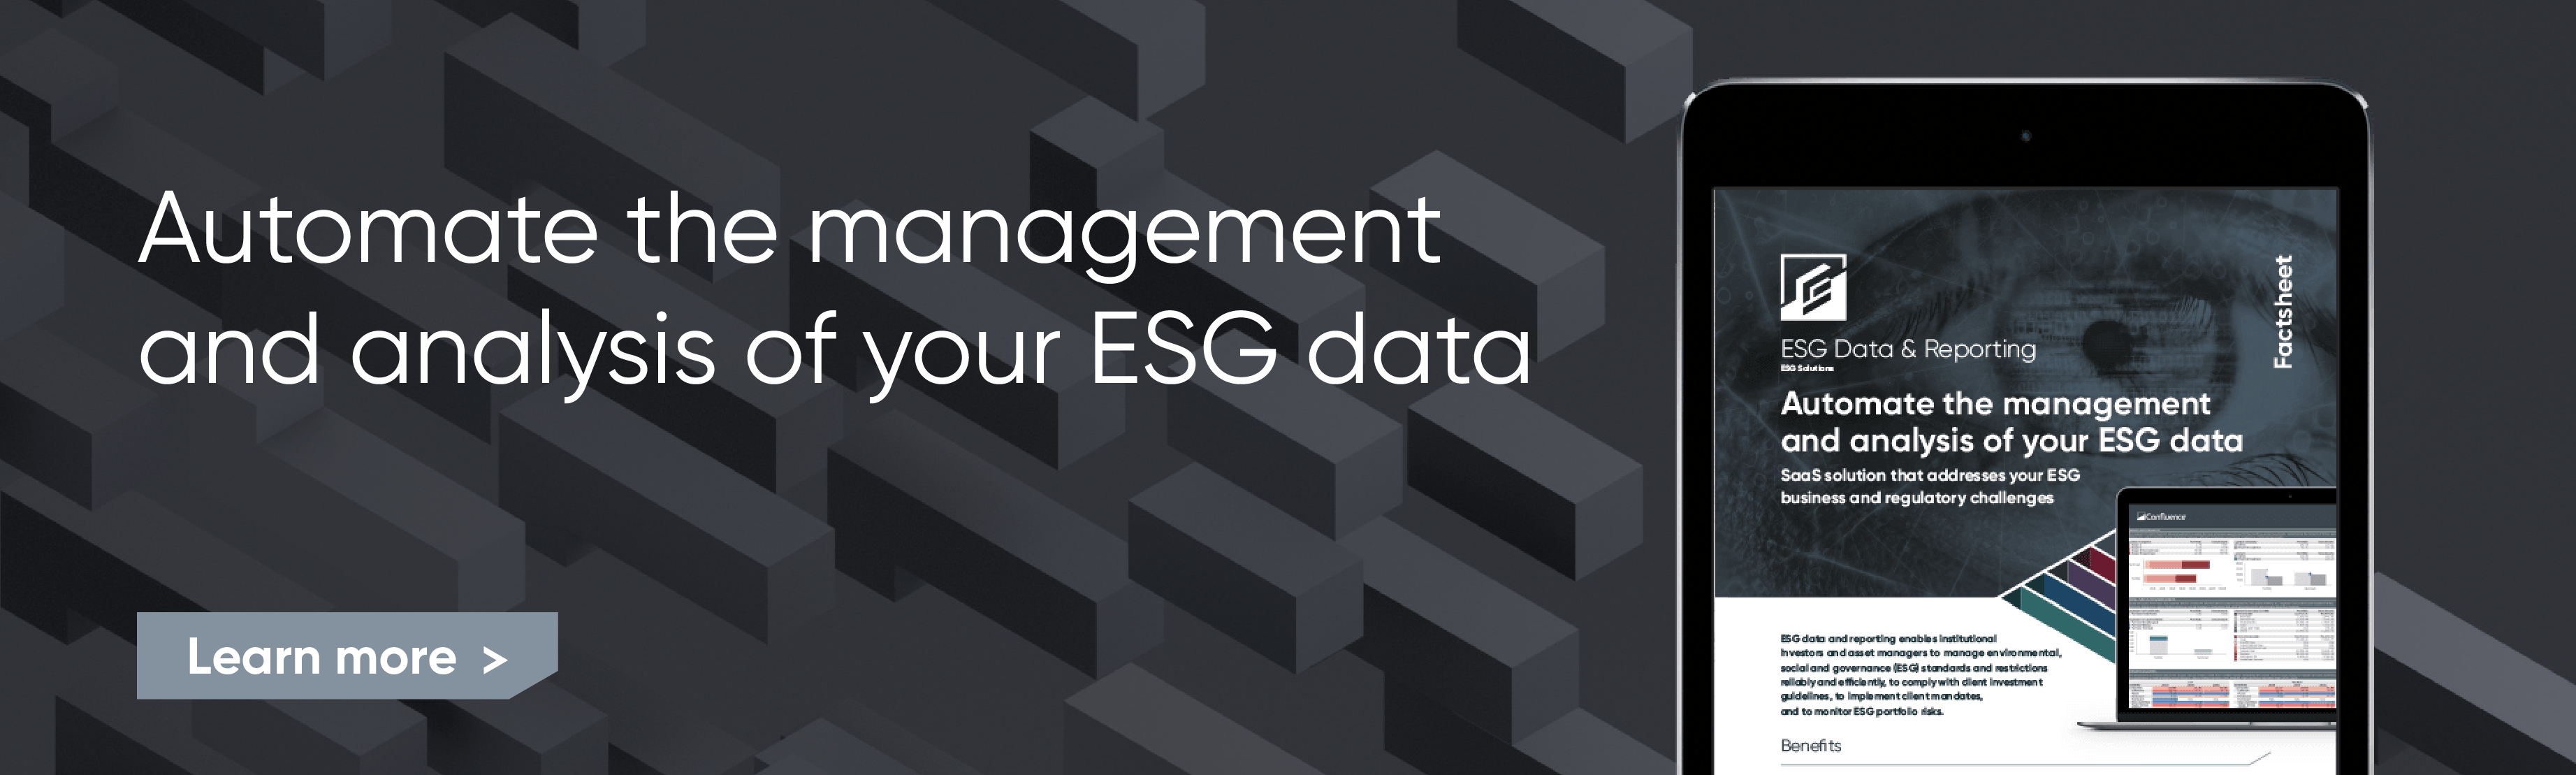 Download our ESG Data & Reporting Factsheet